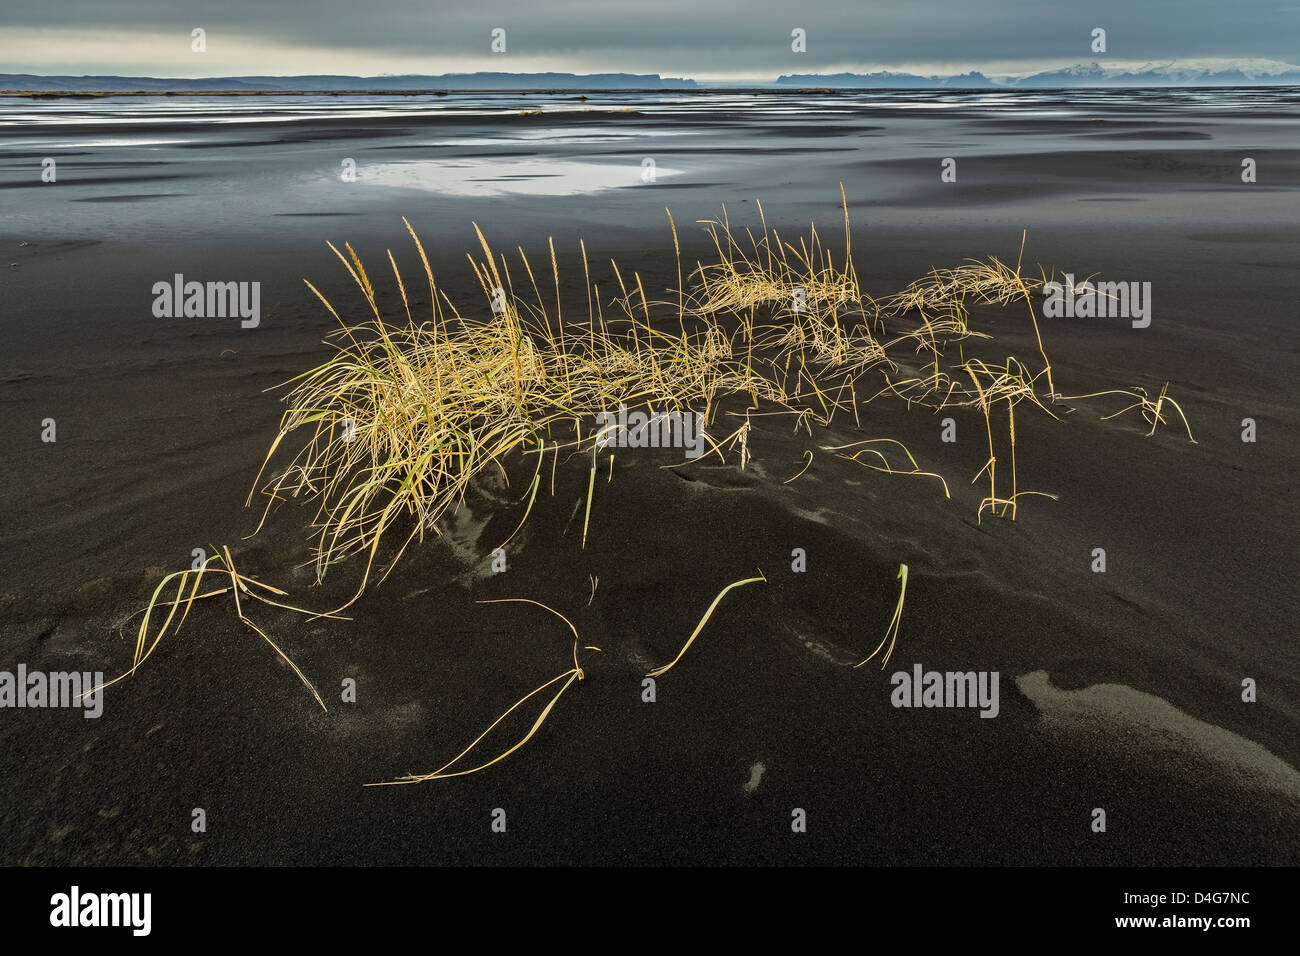 Grass growing in the black sands, Medallandssandur, South Coast Iceland Stock Photo